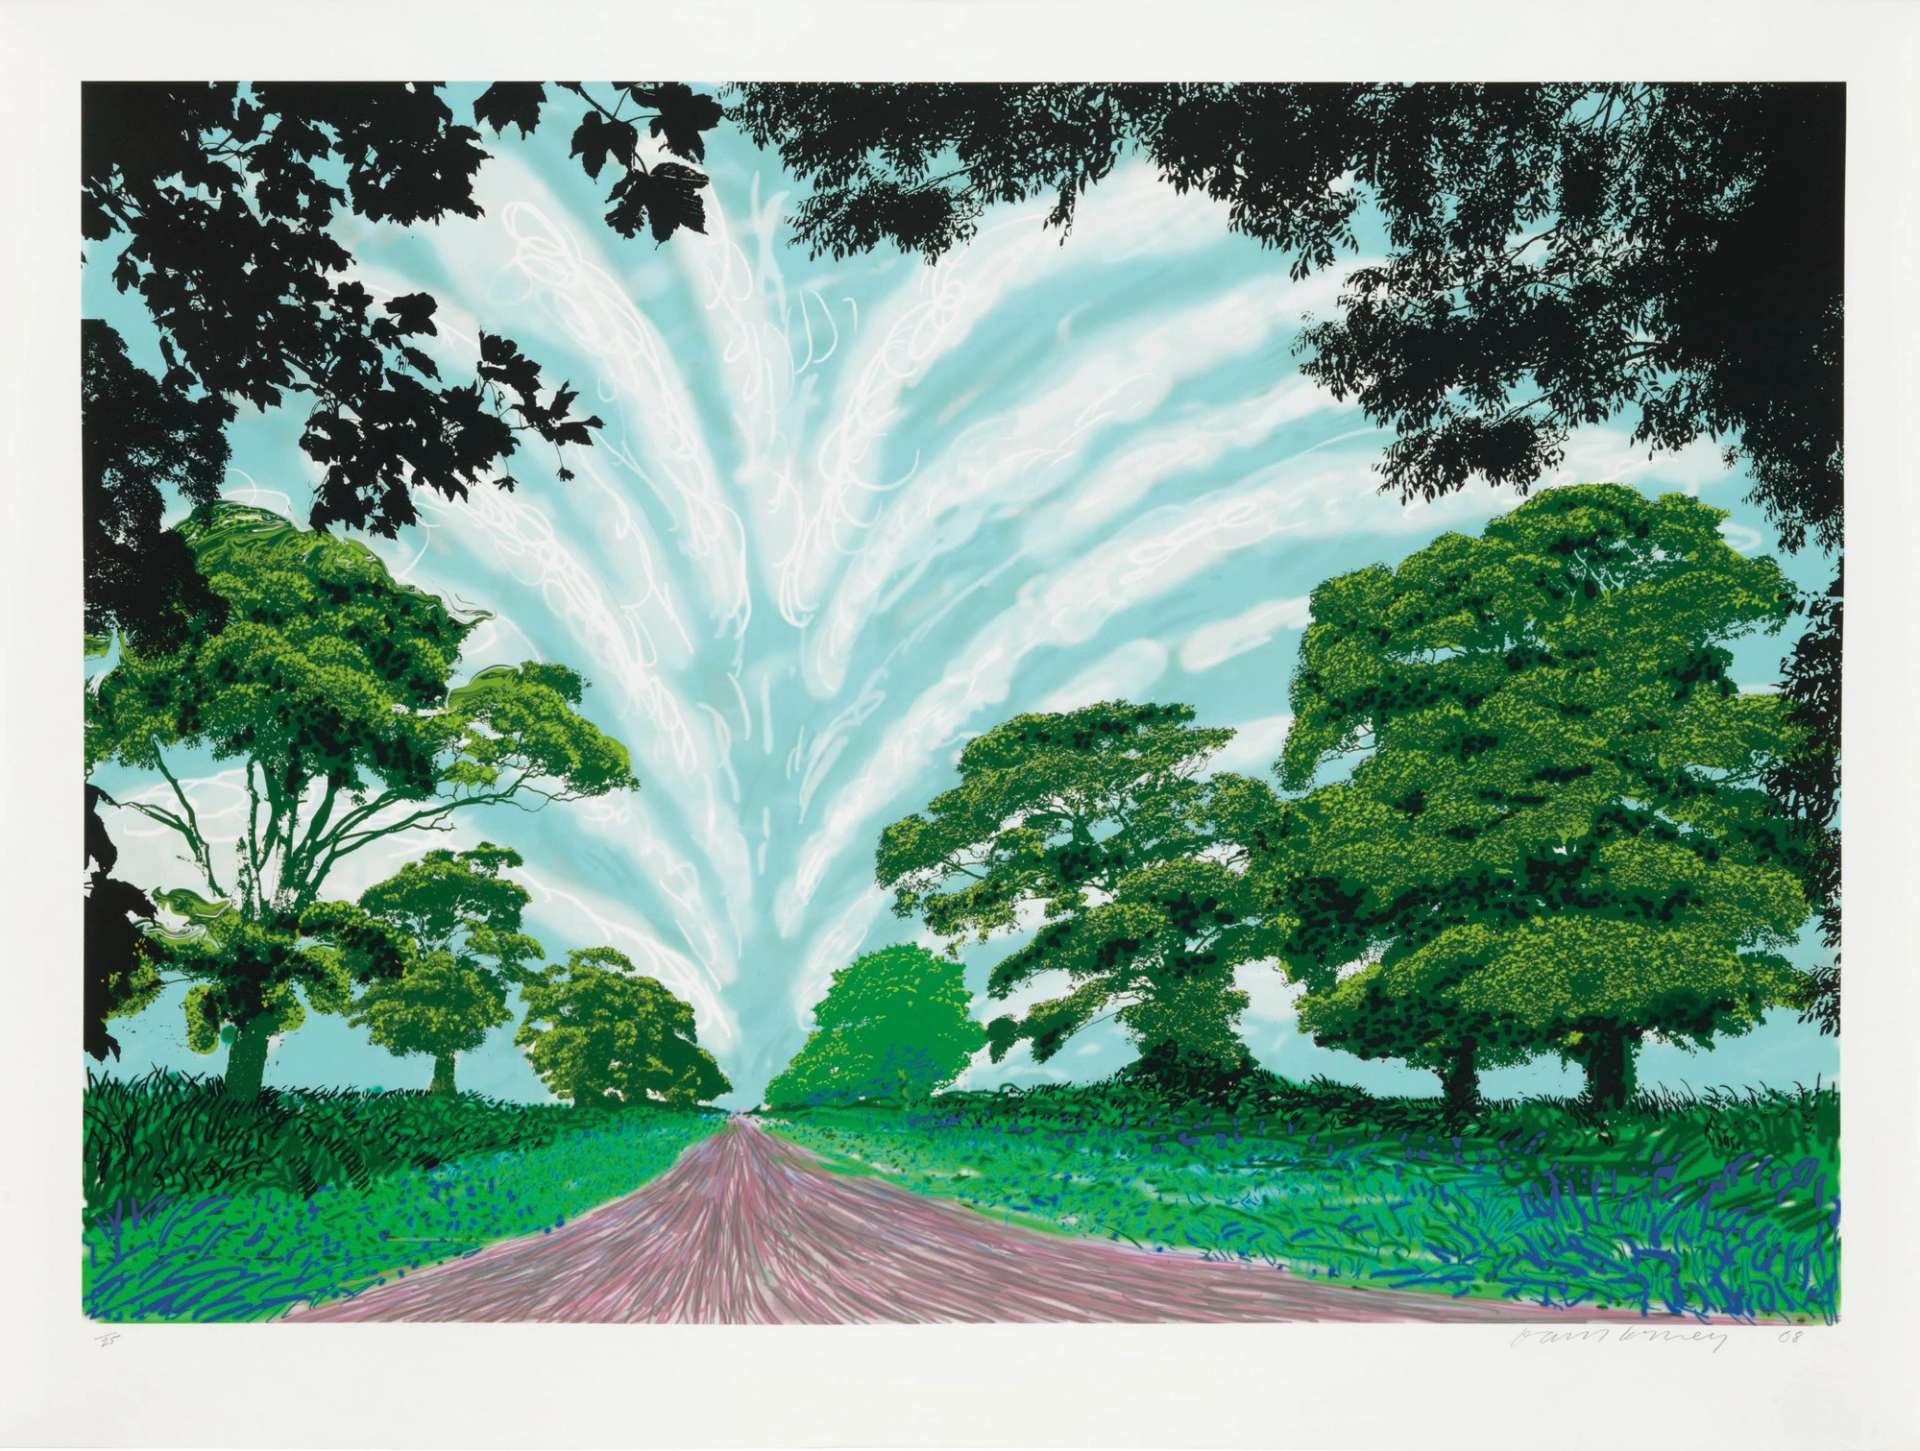 This nature scene by David Hockney shows a field against a blue sky, including vertical funnel clouds.